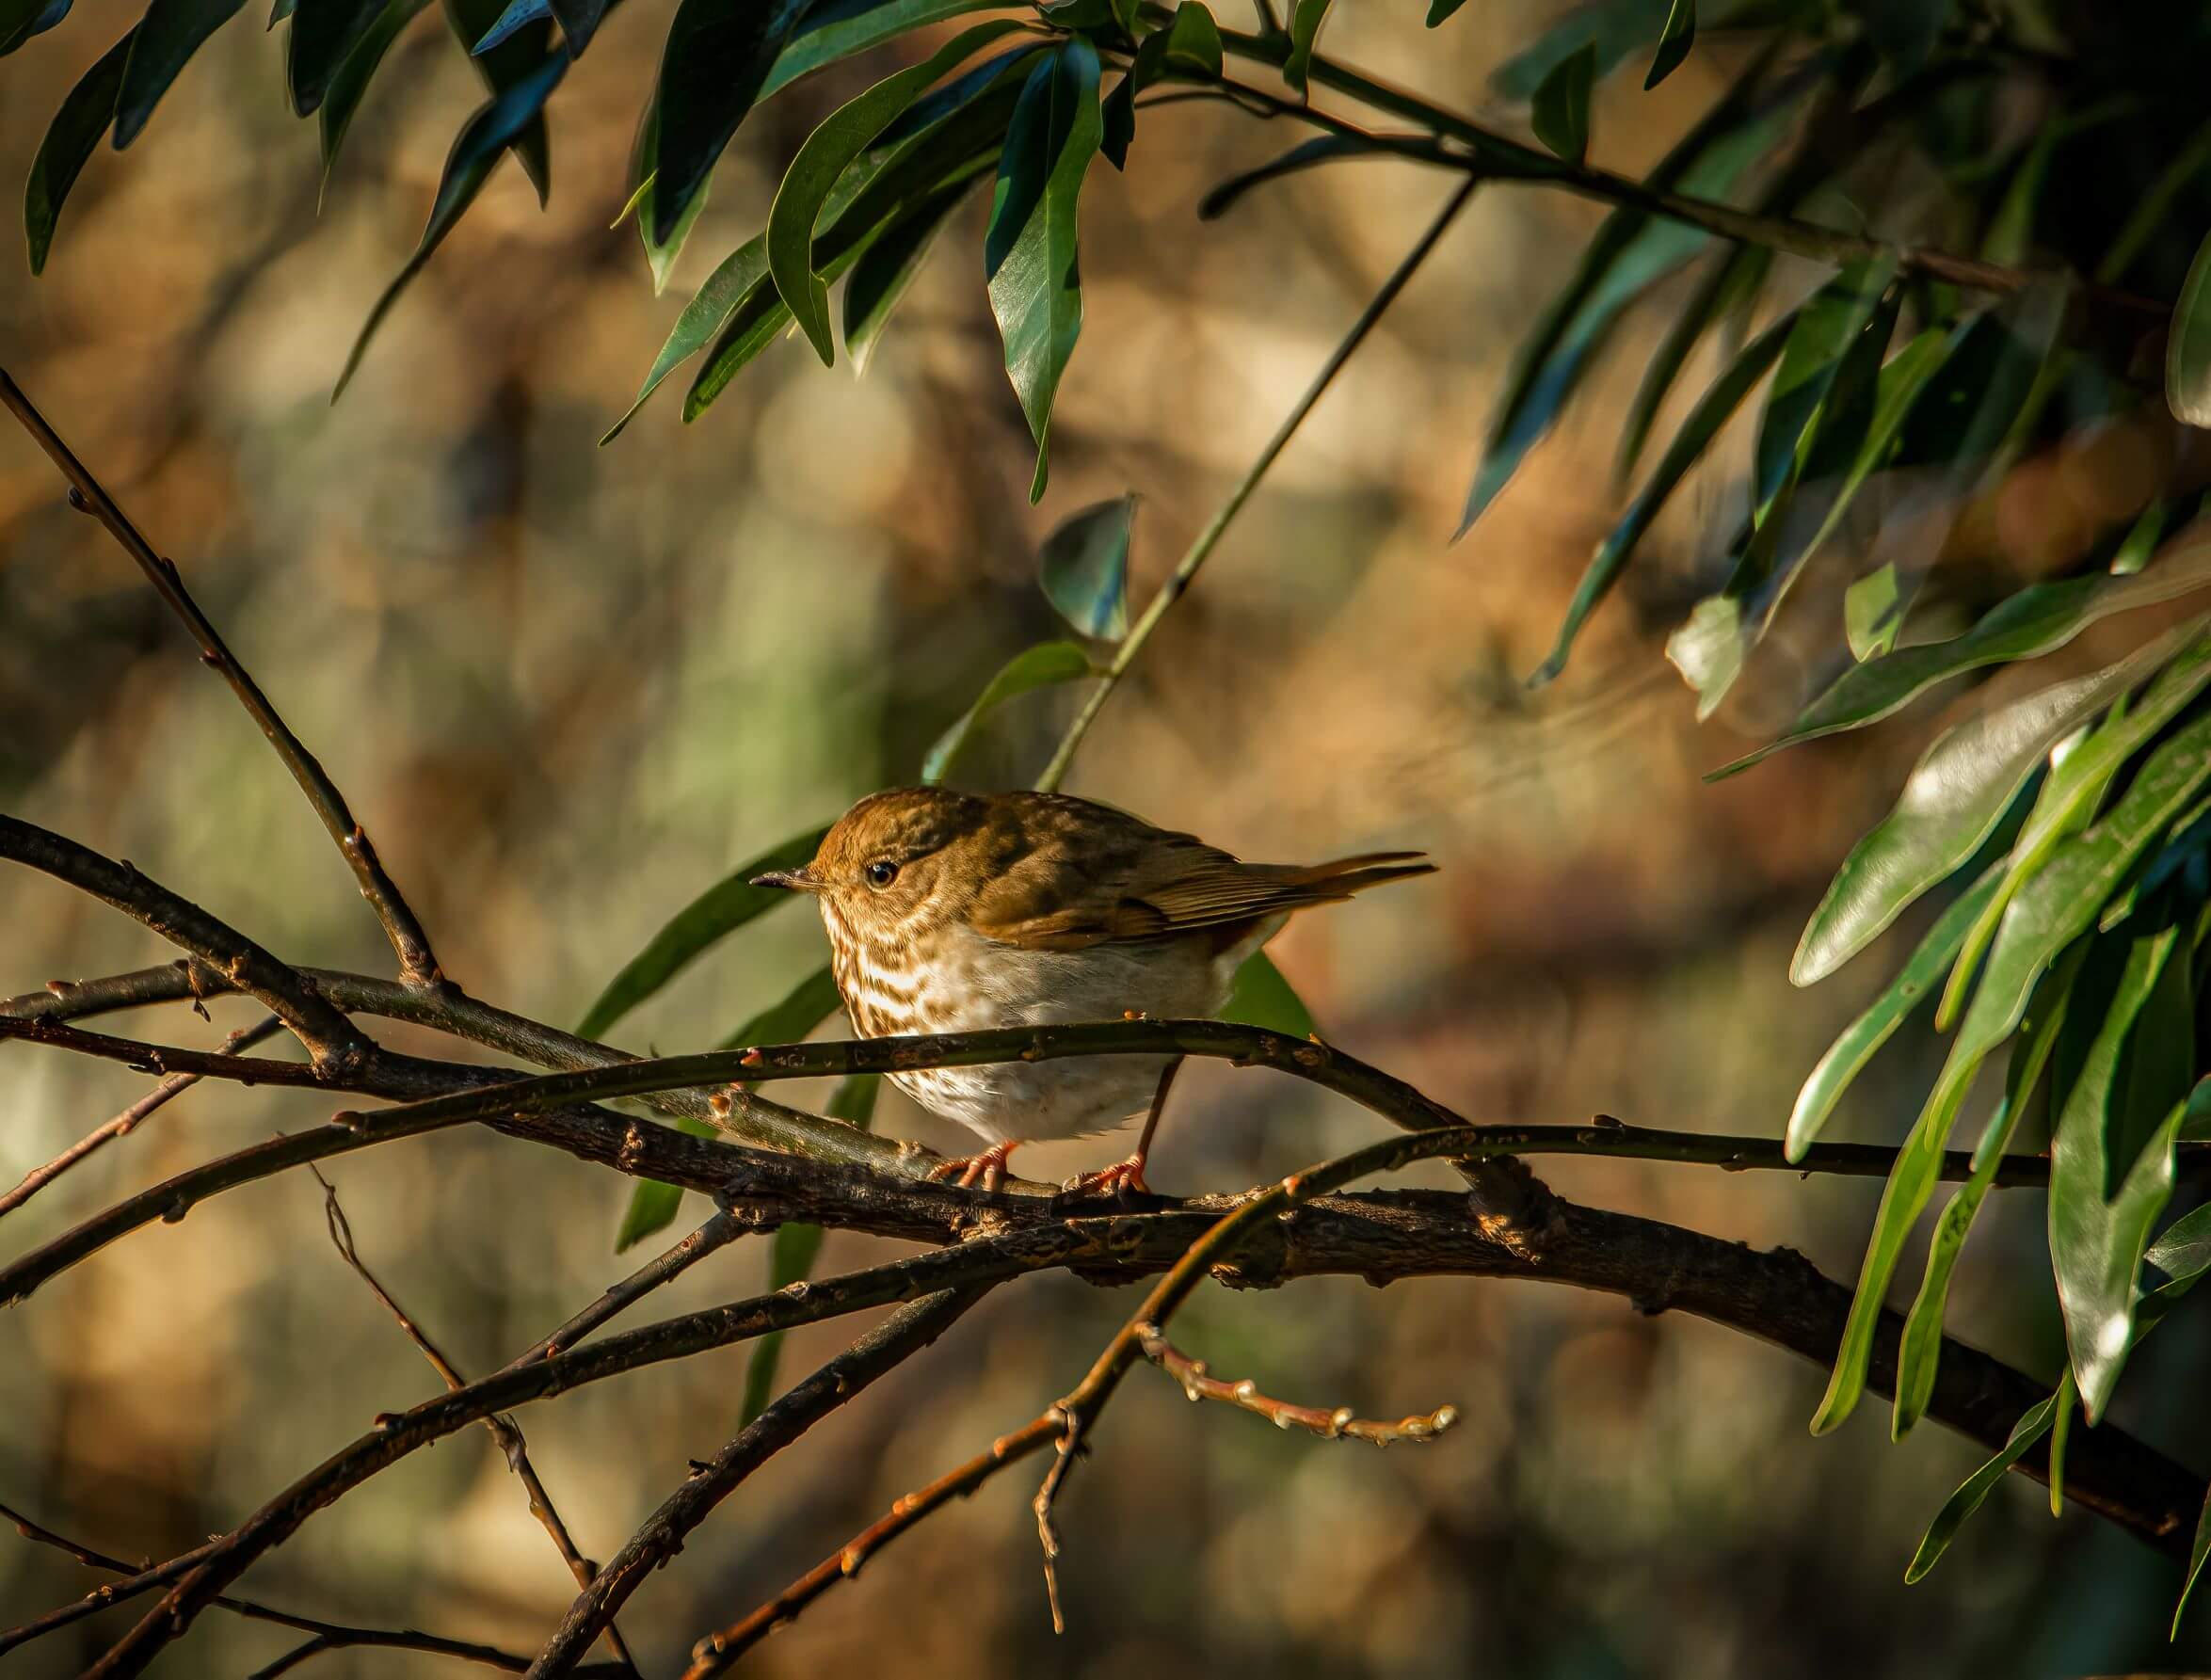 Seaview : close up of small brown and white finch on a branch